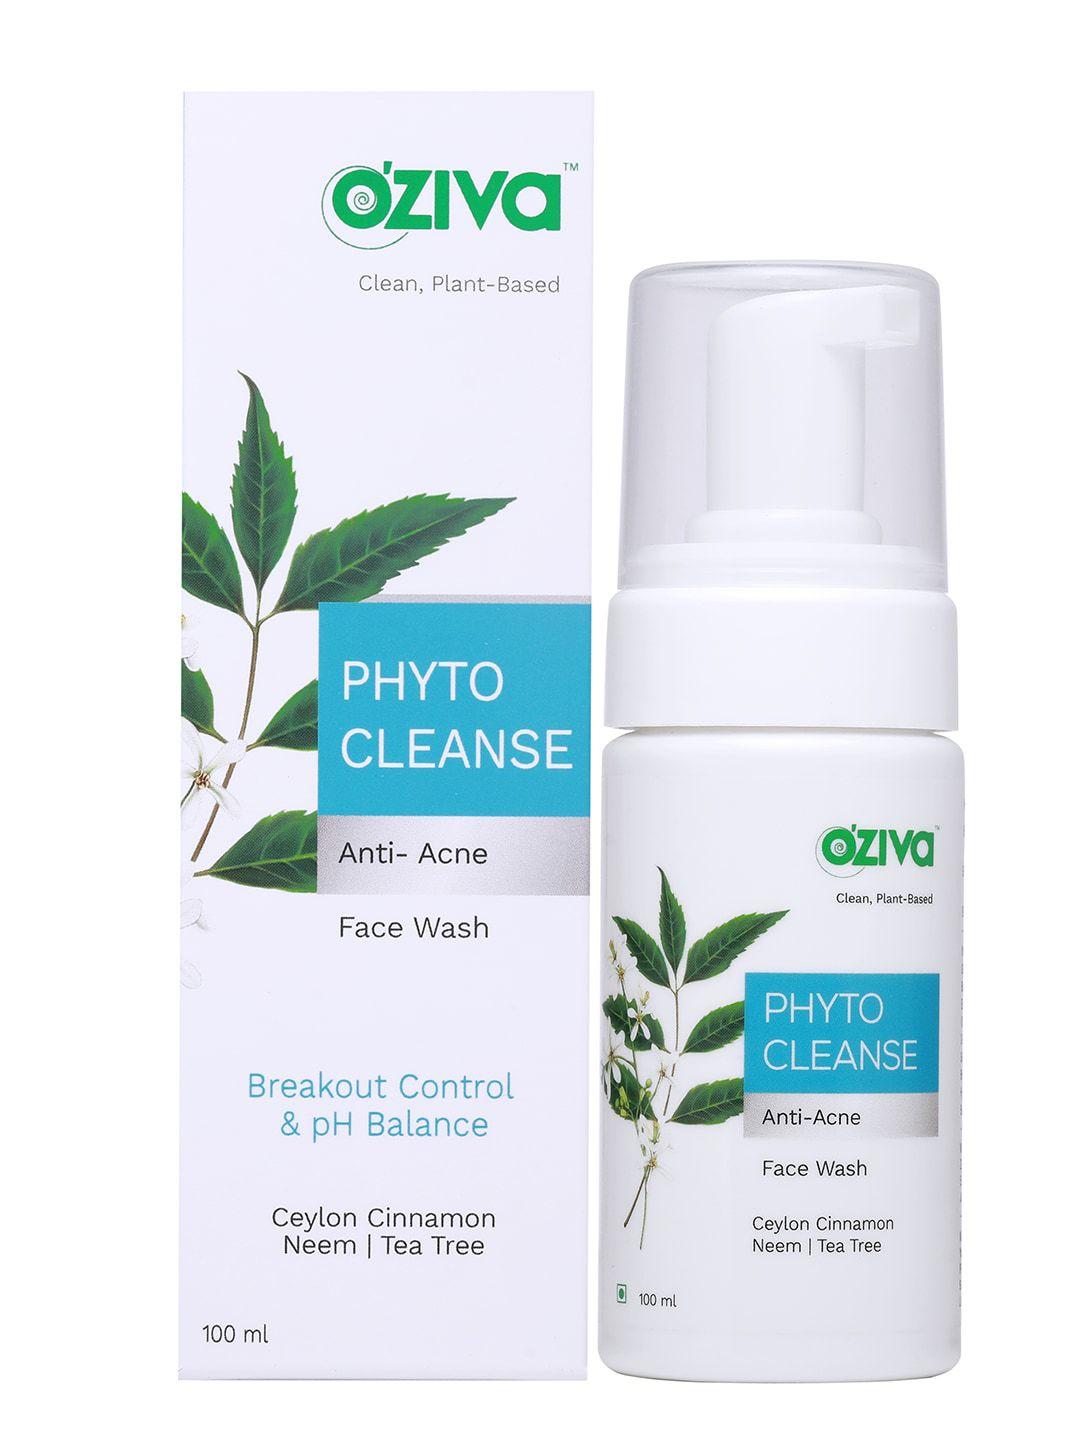 oziva phyto cleanse anti-acne face wash for acne control & pore cleansing 100 ml